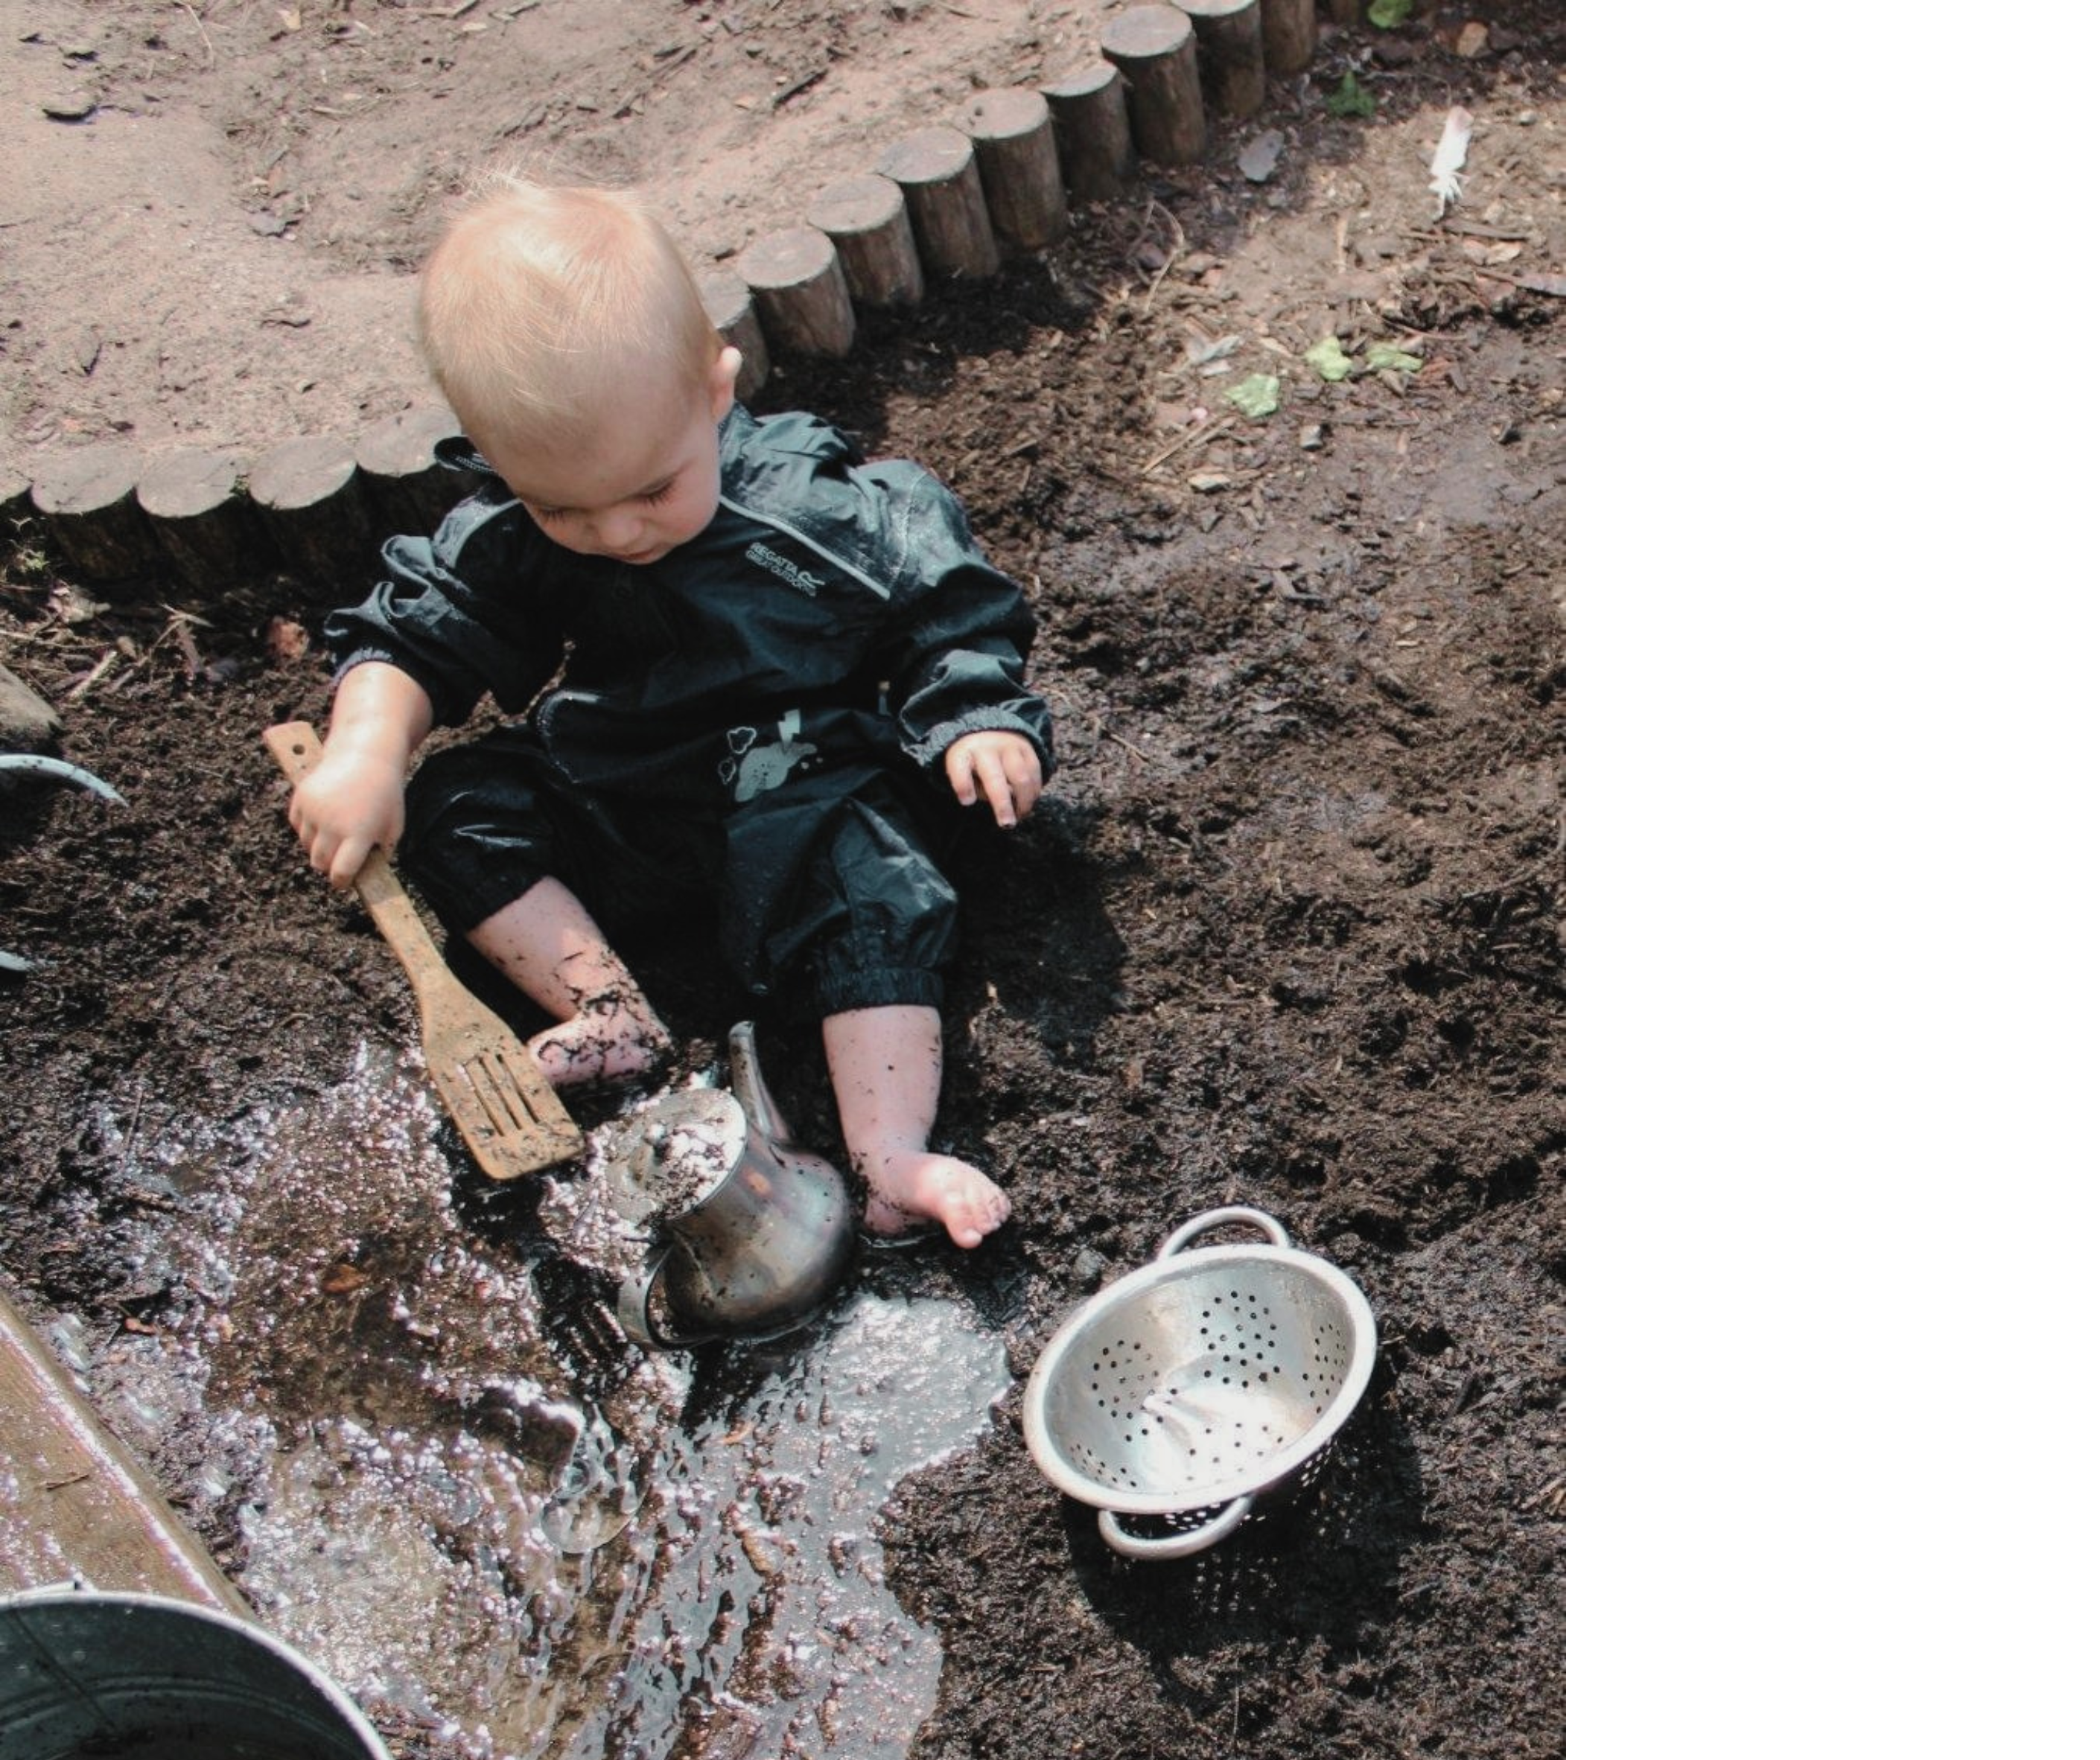 Child playing outdoors in the mud